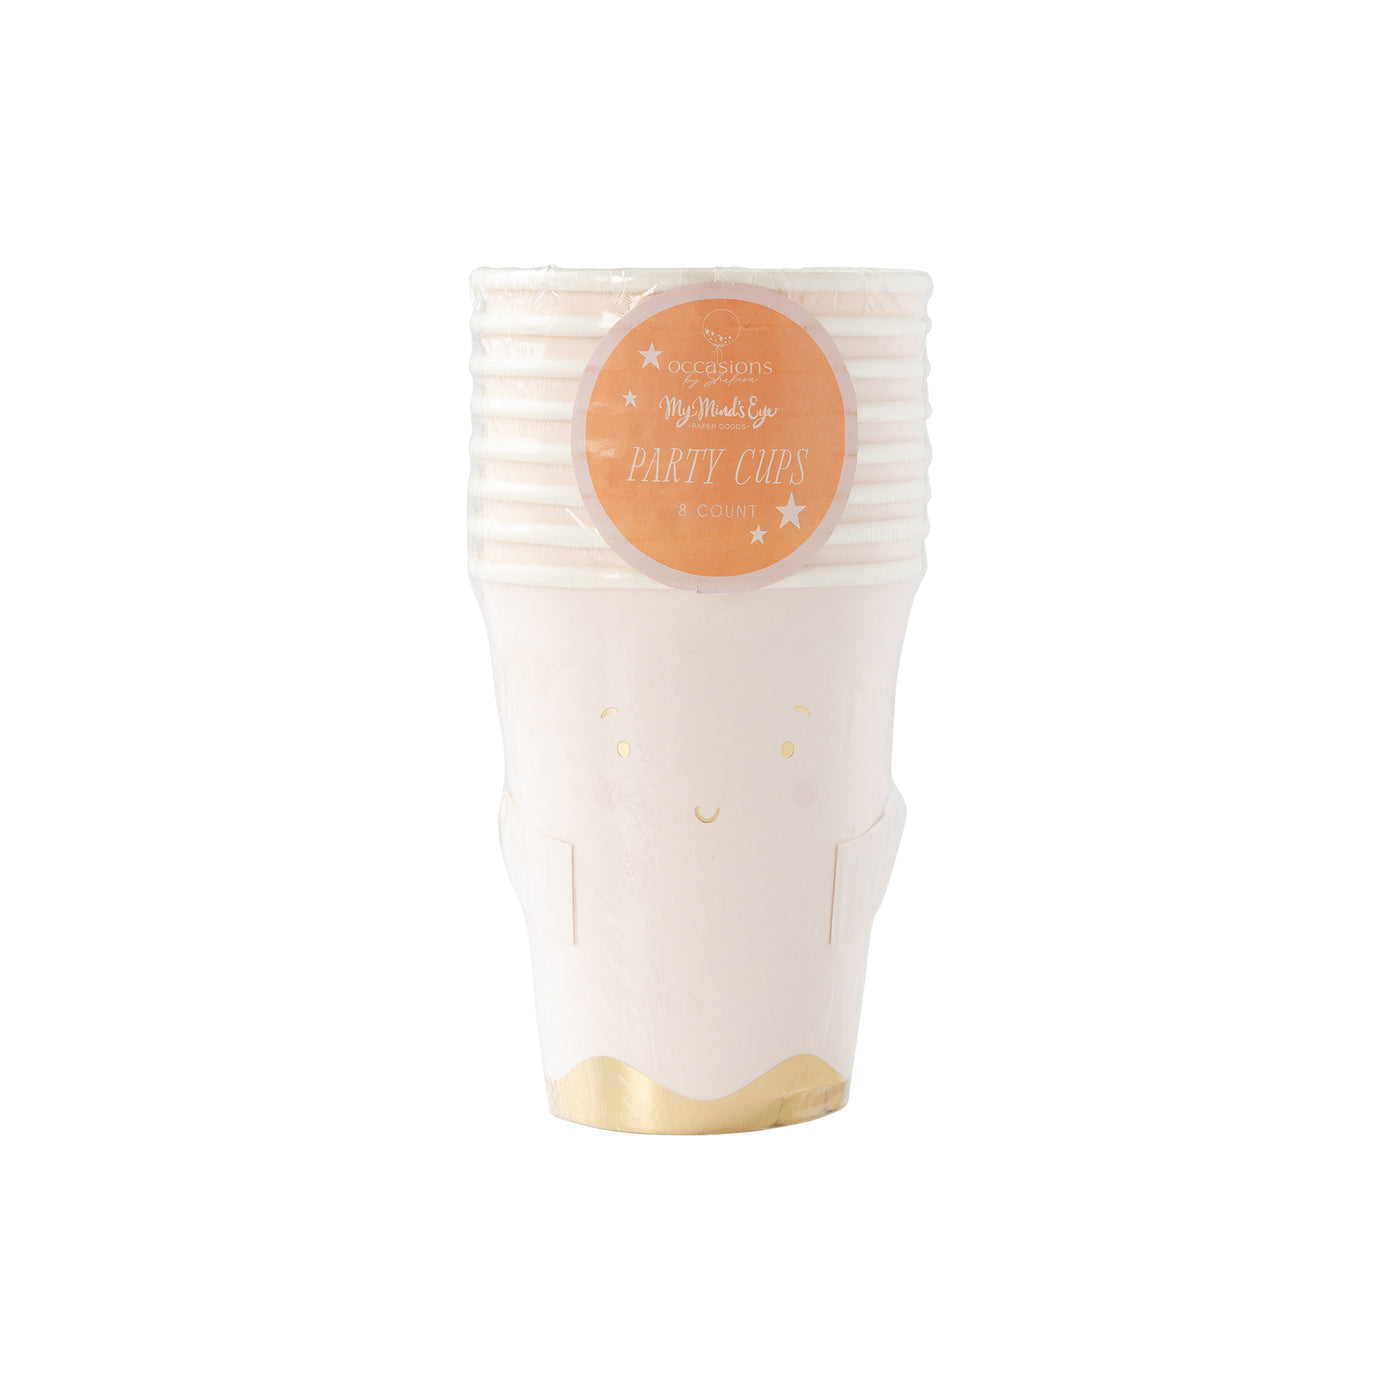 GHL1112 - Occasions by Shakira - Ghost Paper Party Cup